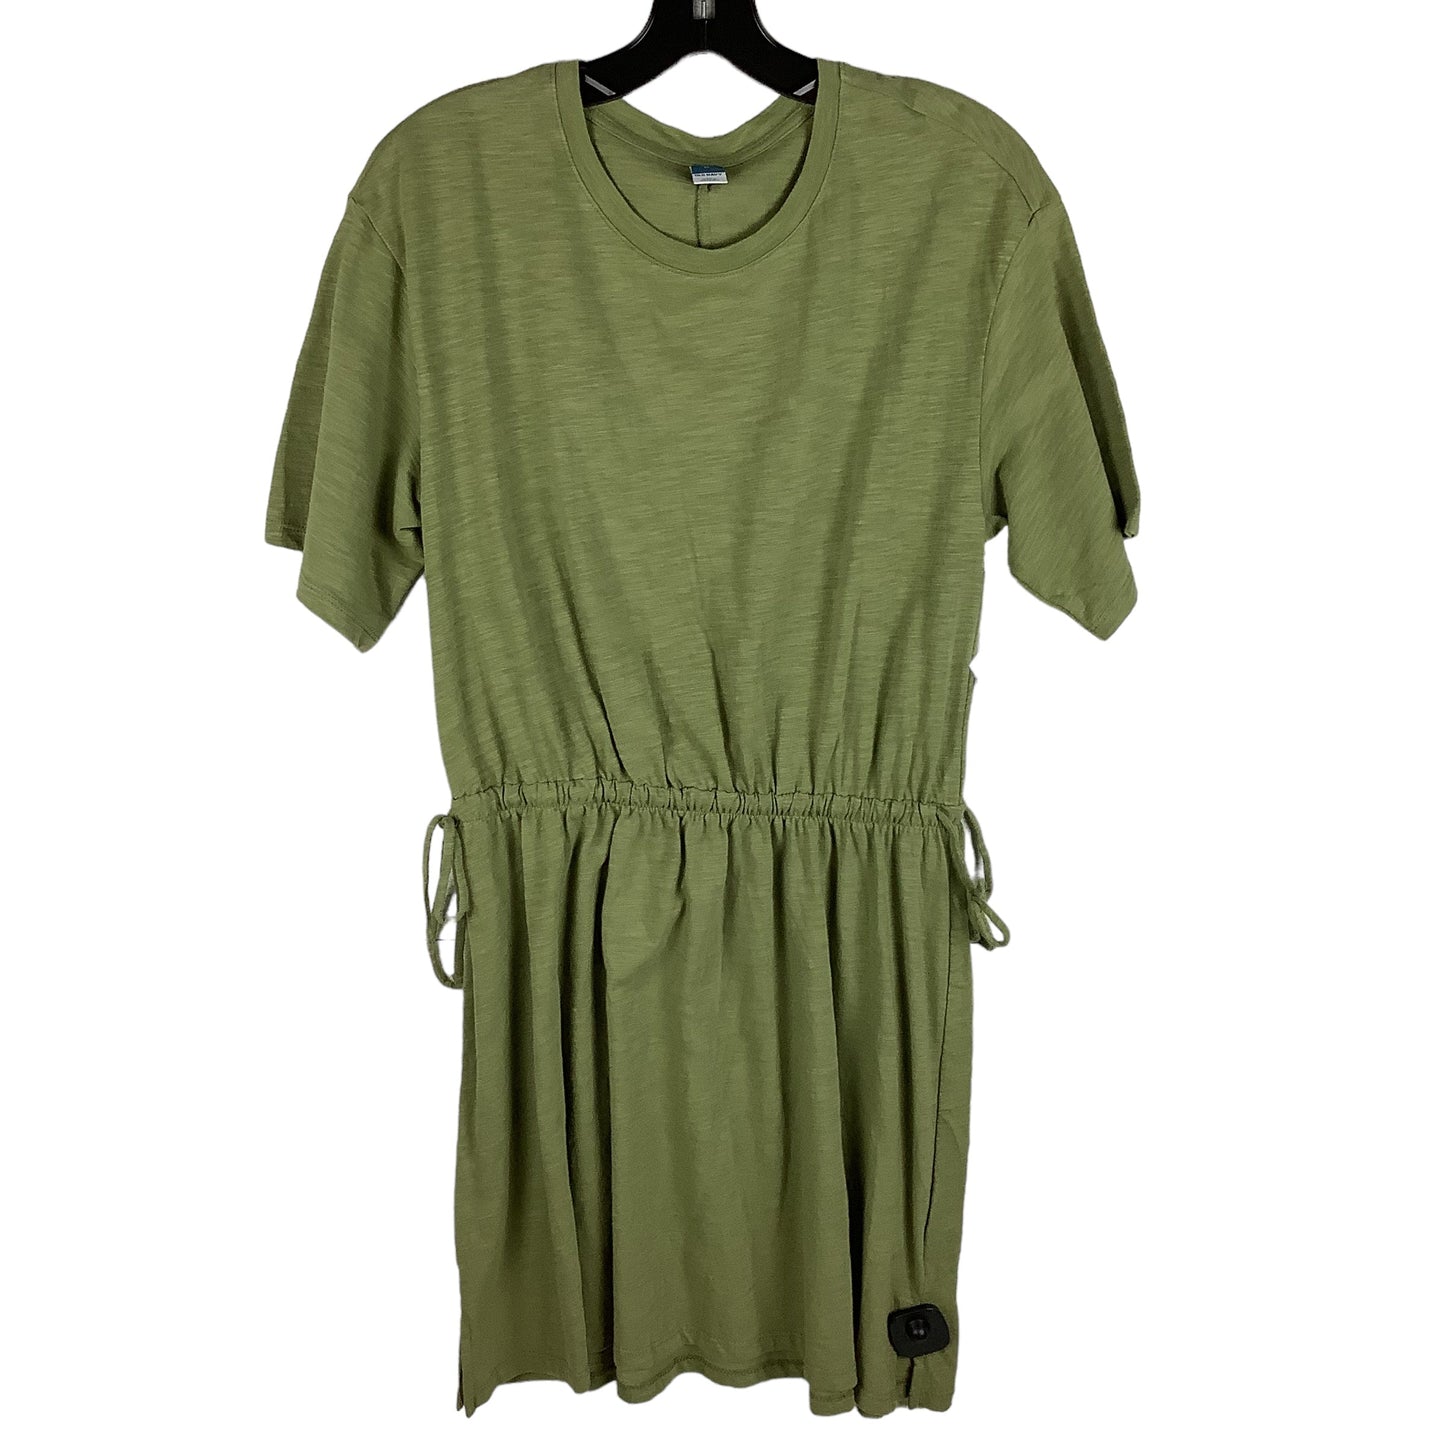 Green Dress Casual Midi Old Navy, Size M